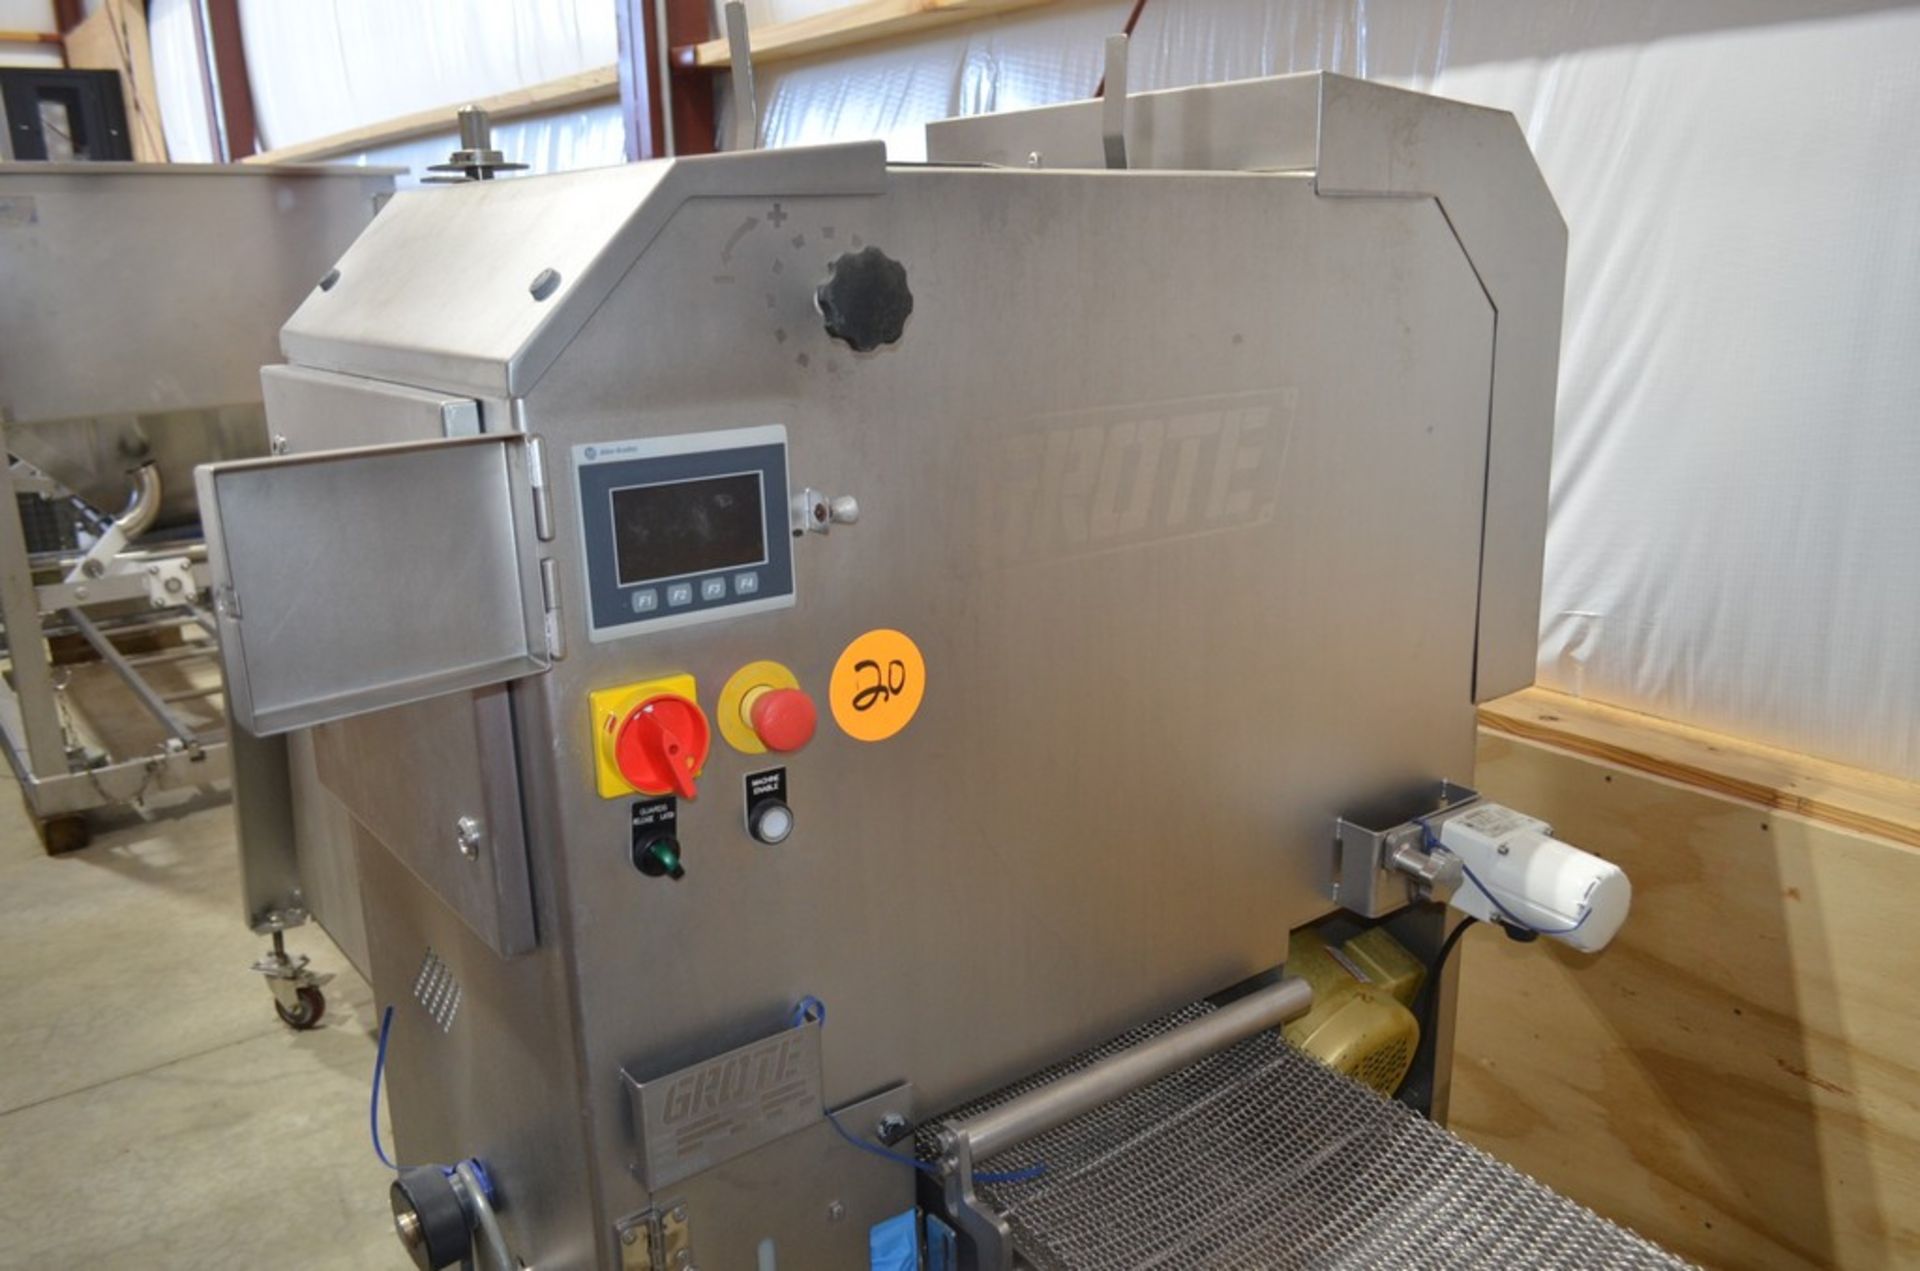 Grote 613-VS2-LES Slicer with Infeed Conveyor, Spare Parts, 208/240 Volt, S/N: 1176508 (2014) - Image 6 of 9